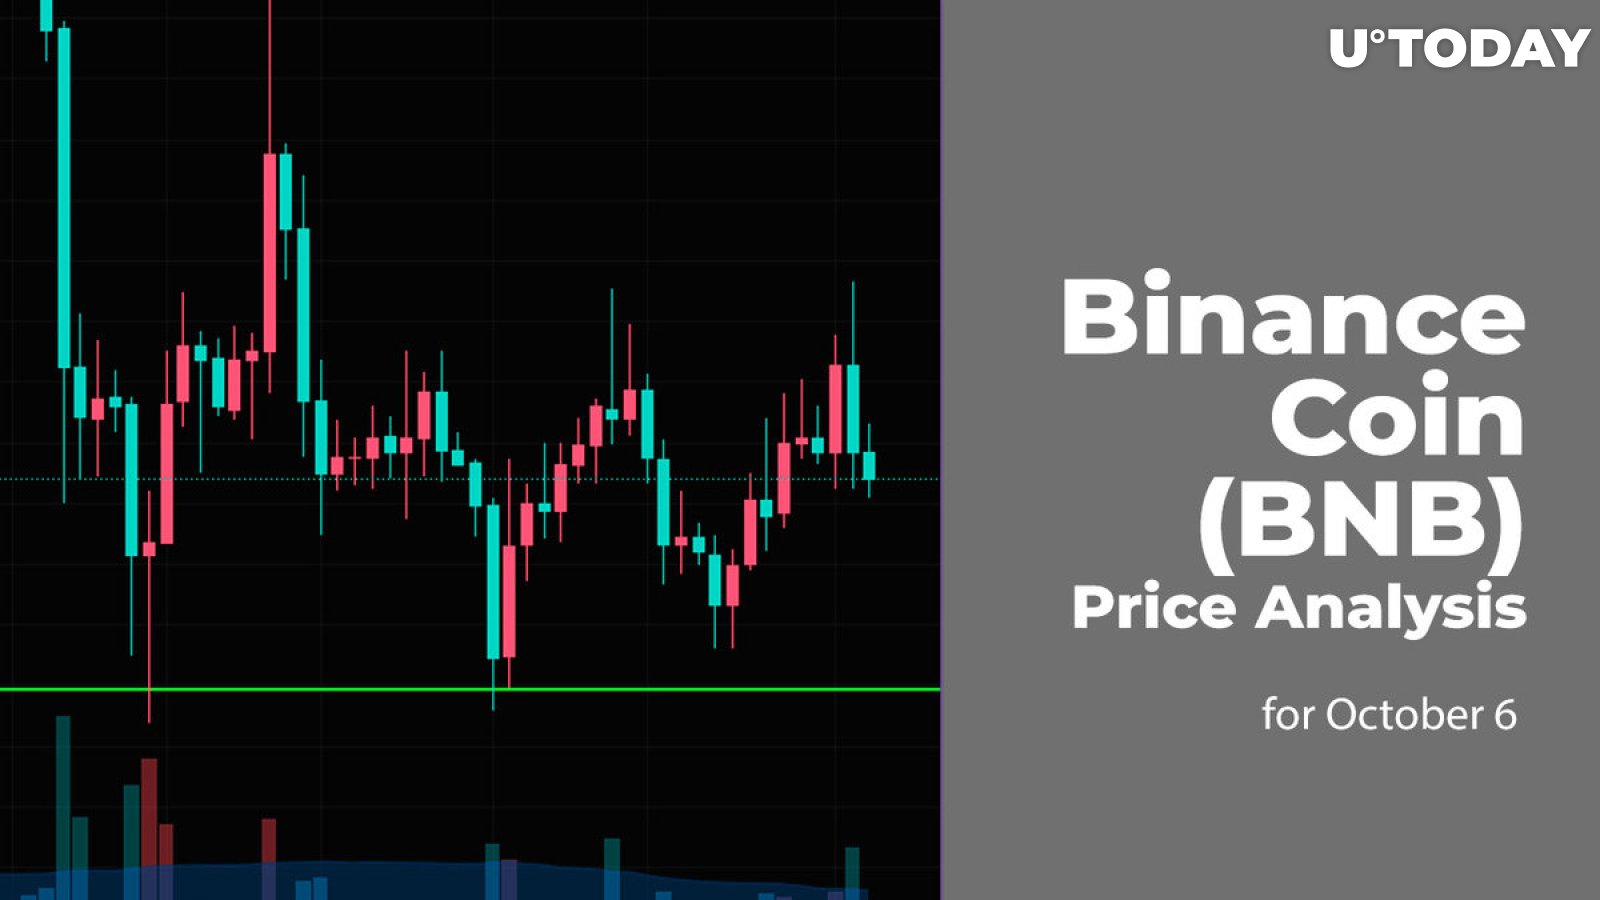 Binance Coin (BNB) Price Analysis for October 6